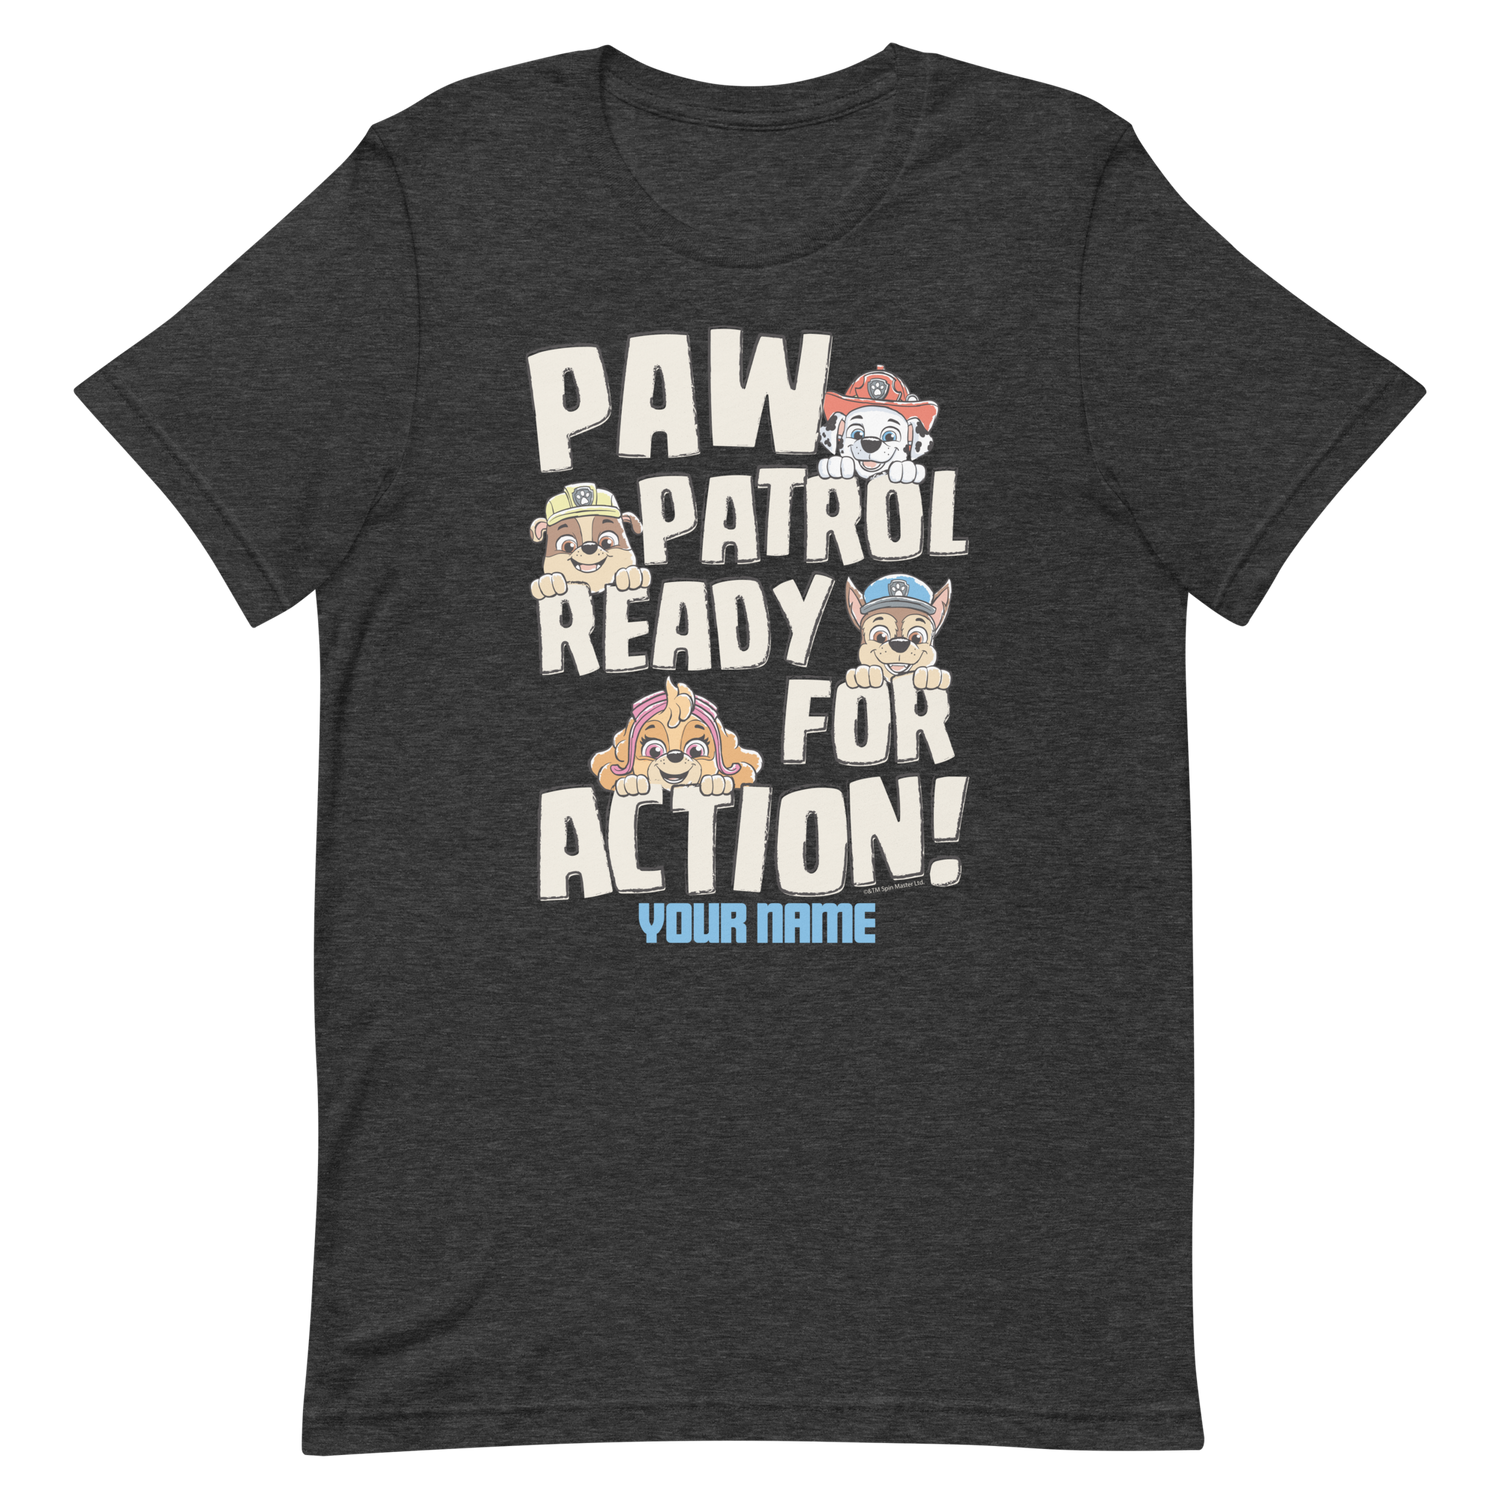 PAW Patrol Ready For Action Personalized Adult Short Sleeve T-Shirt